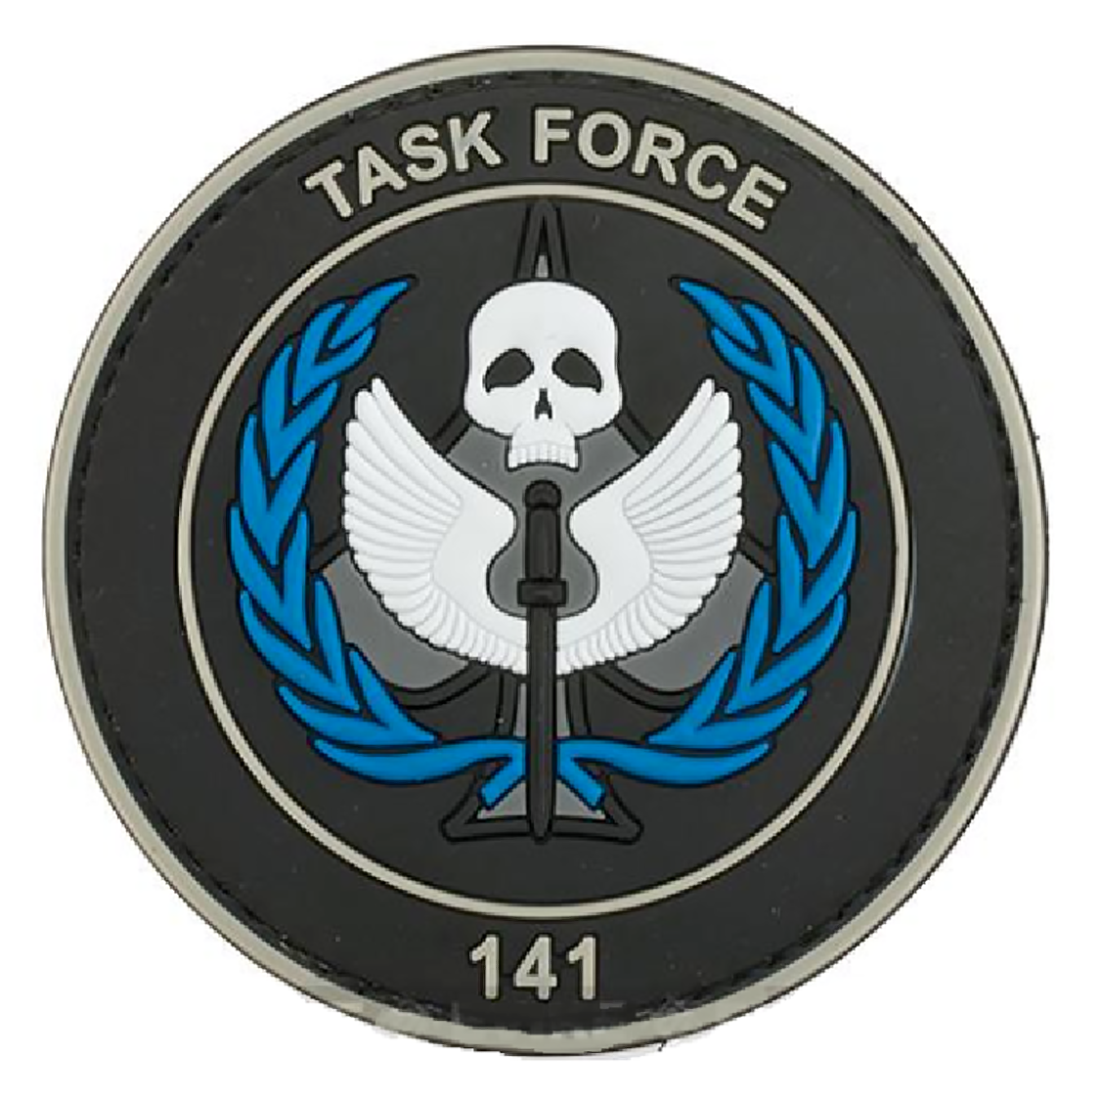 TASK FORCE 141 Tactical Rubber Velcro Patches